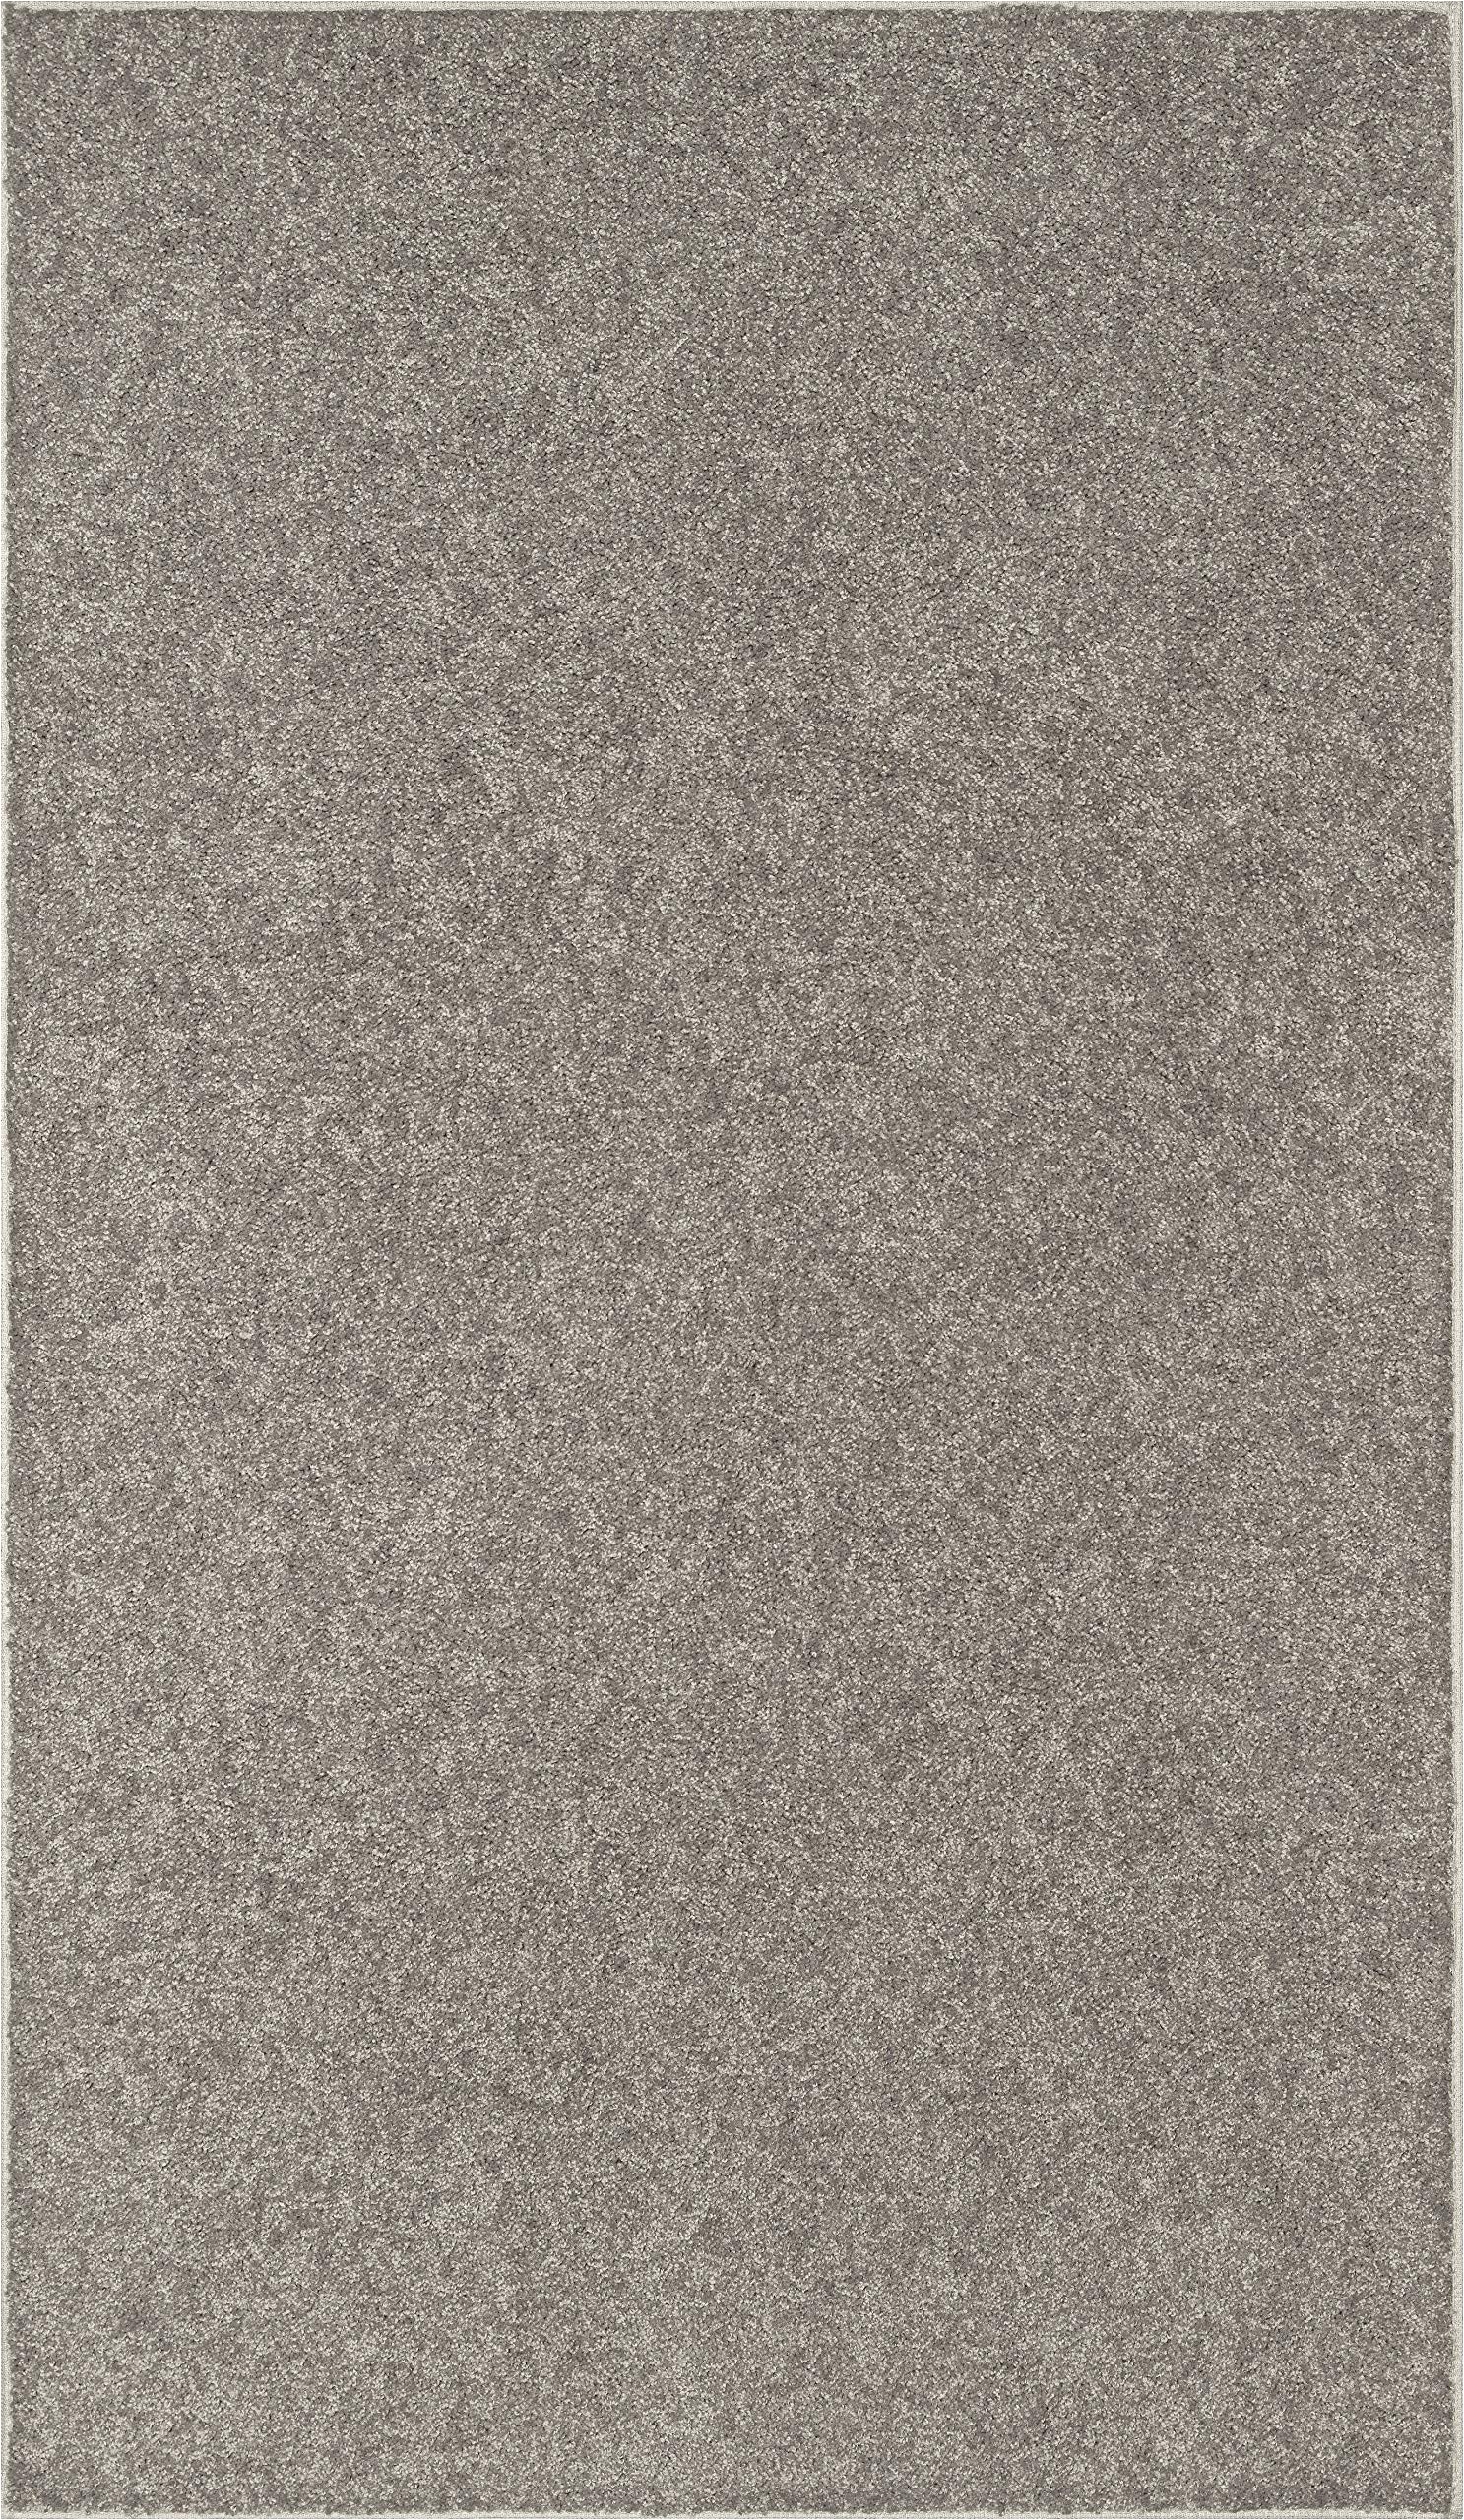 Solid Color Textured area Rugs Bright House solid Color Custom Size Runner area Rug Grey 2 6" X 16